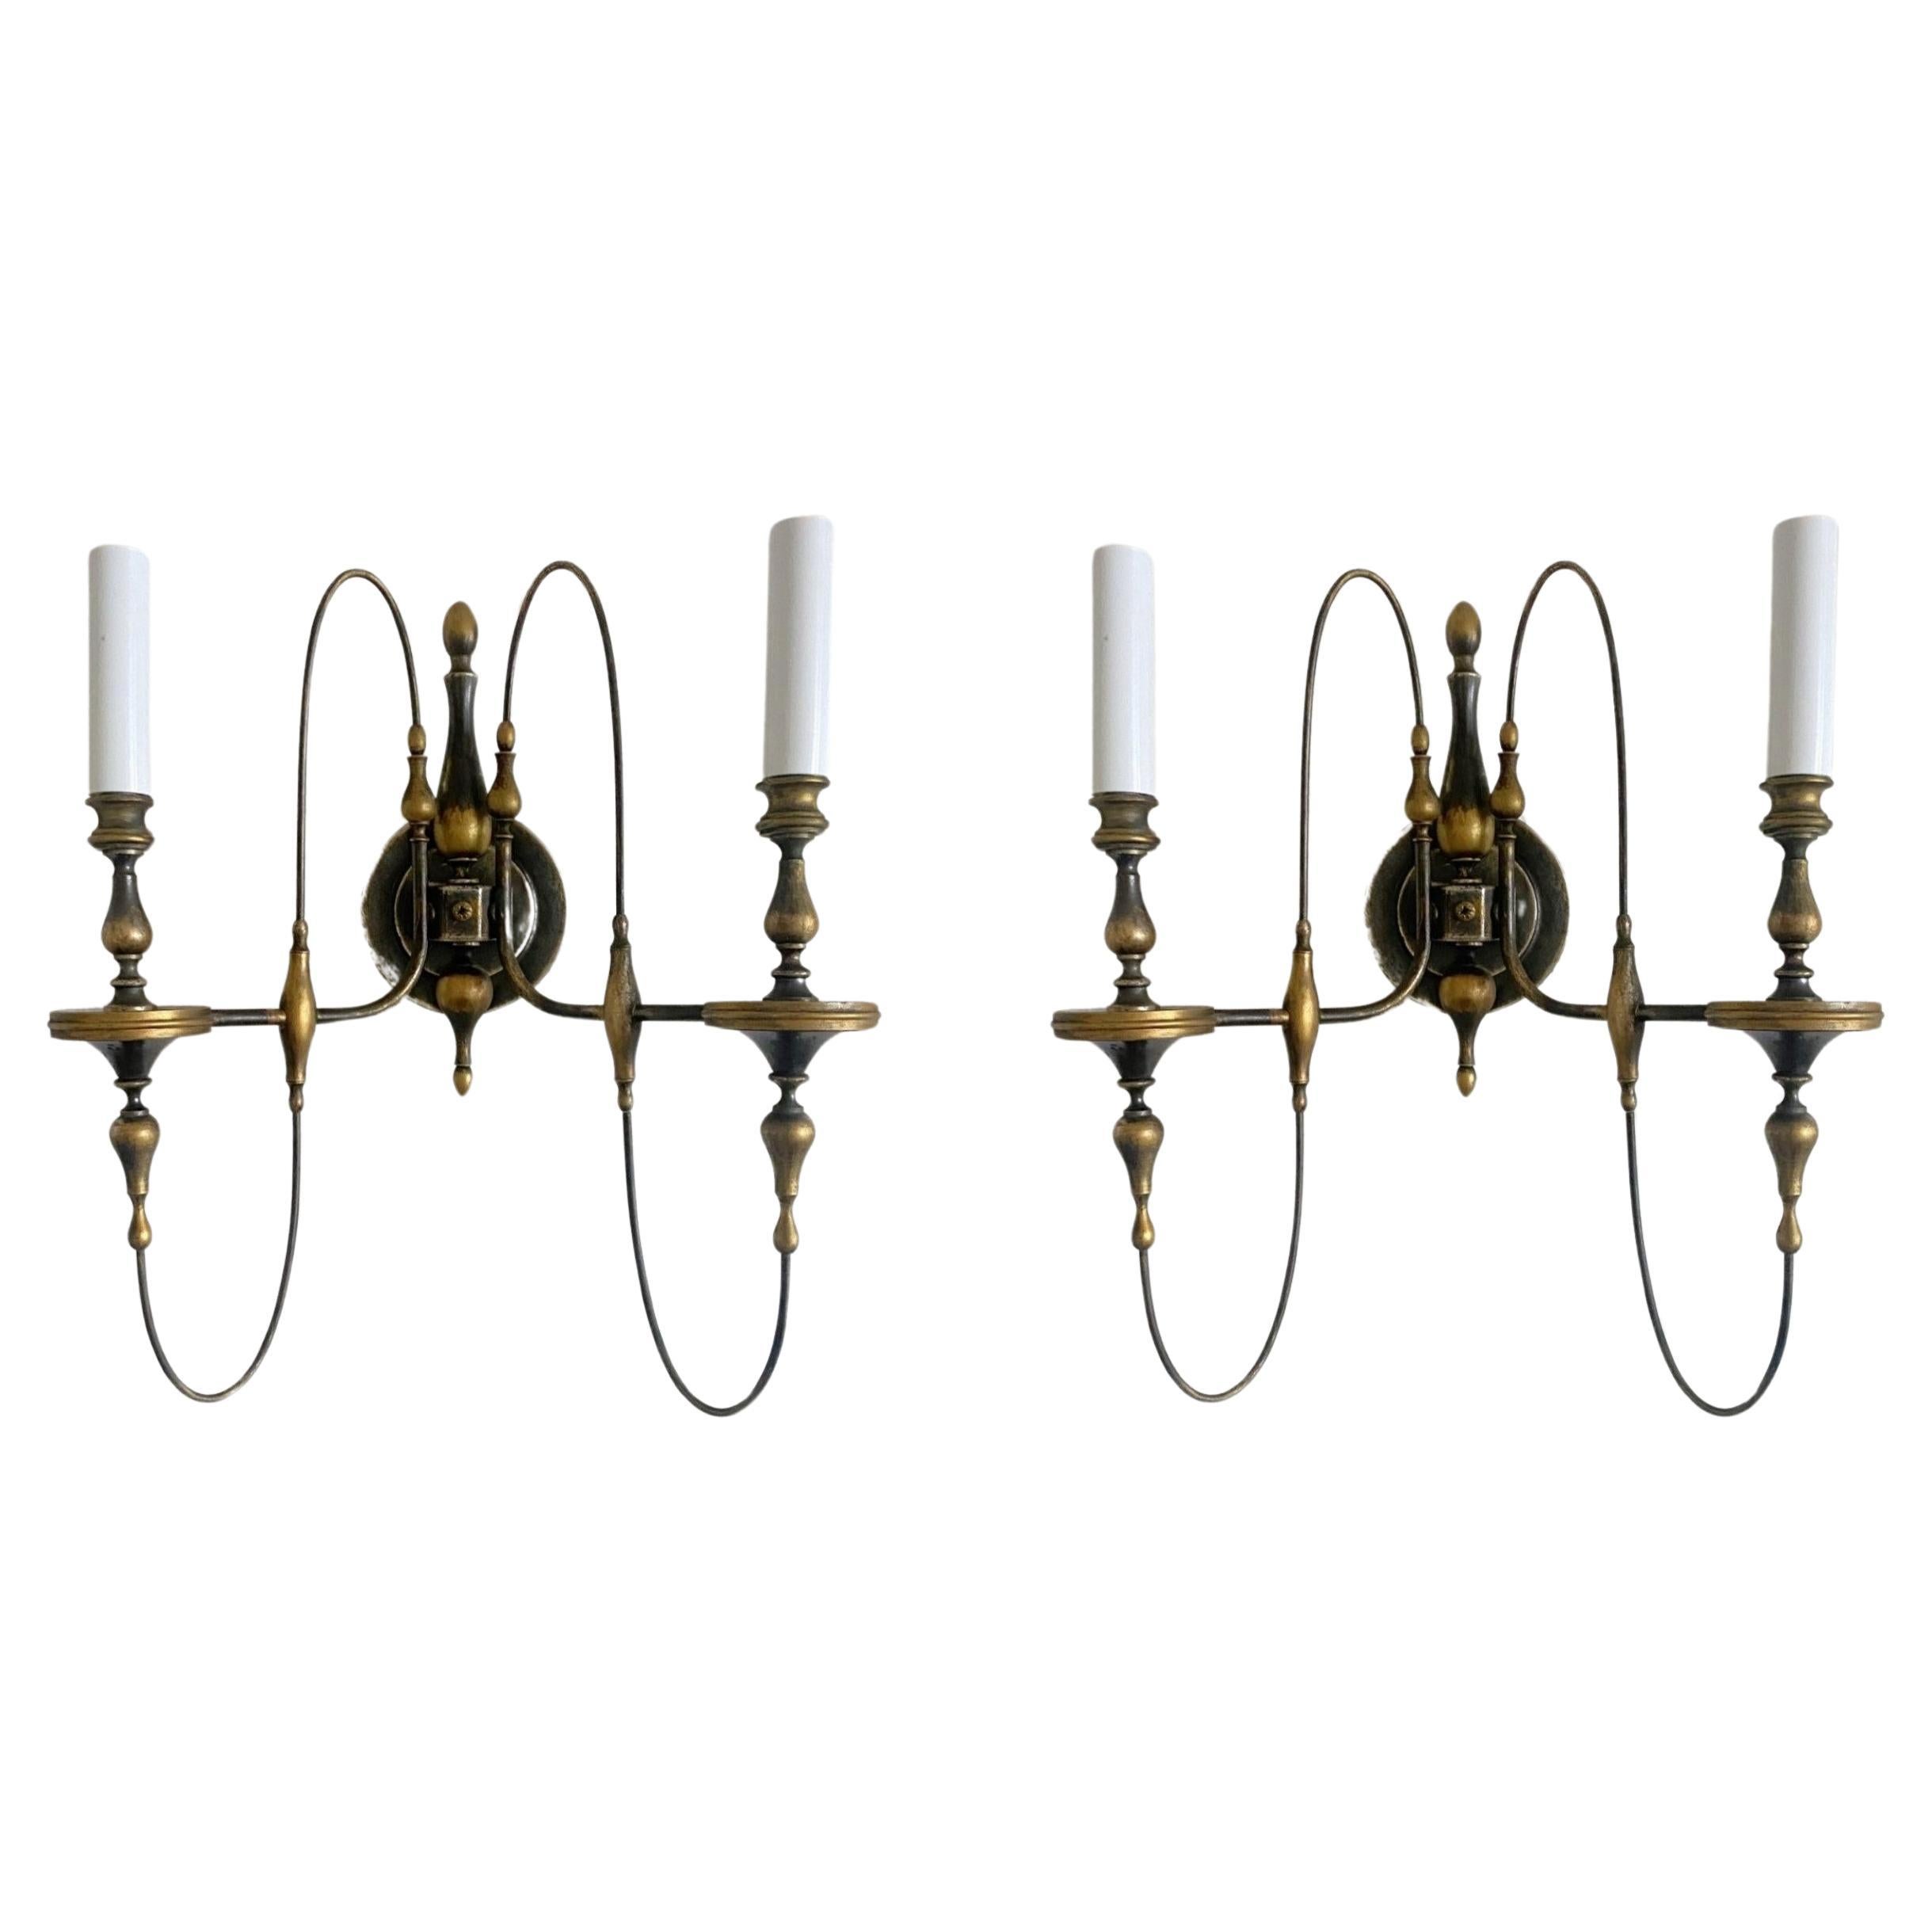 Rare Pair of Italian Brass Wall Sconces by Gaetano Sciolari, Italy 1950s, Marked For Sale